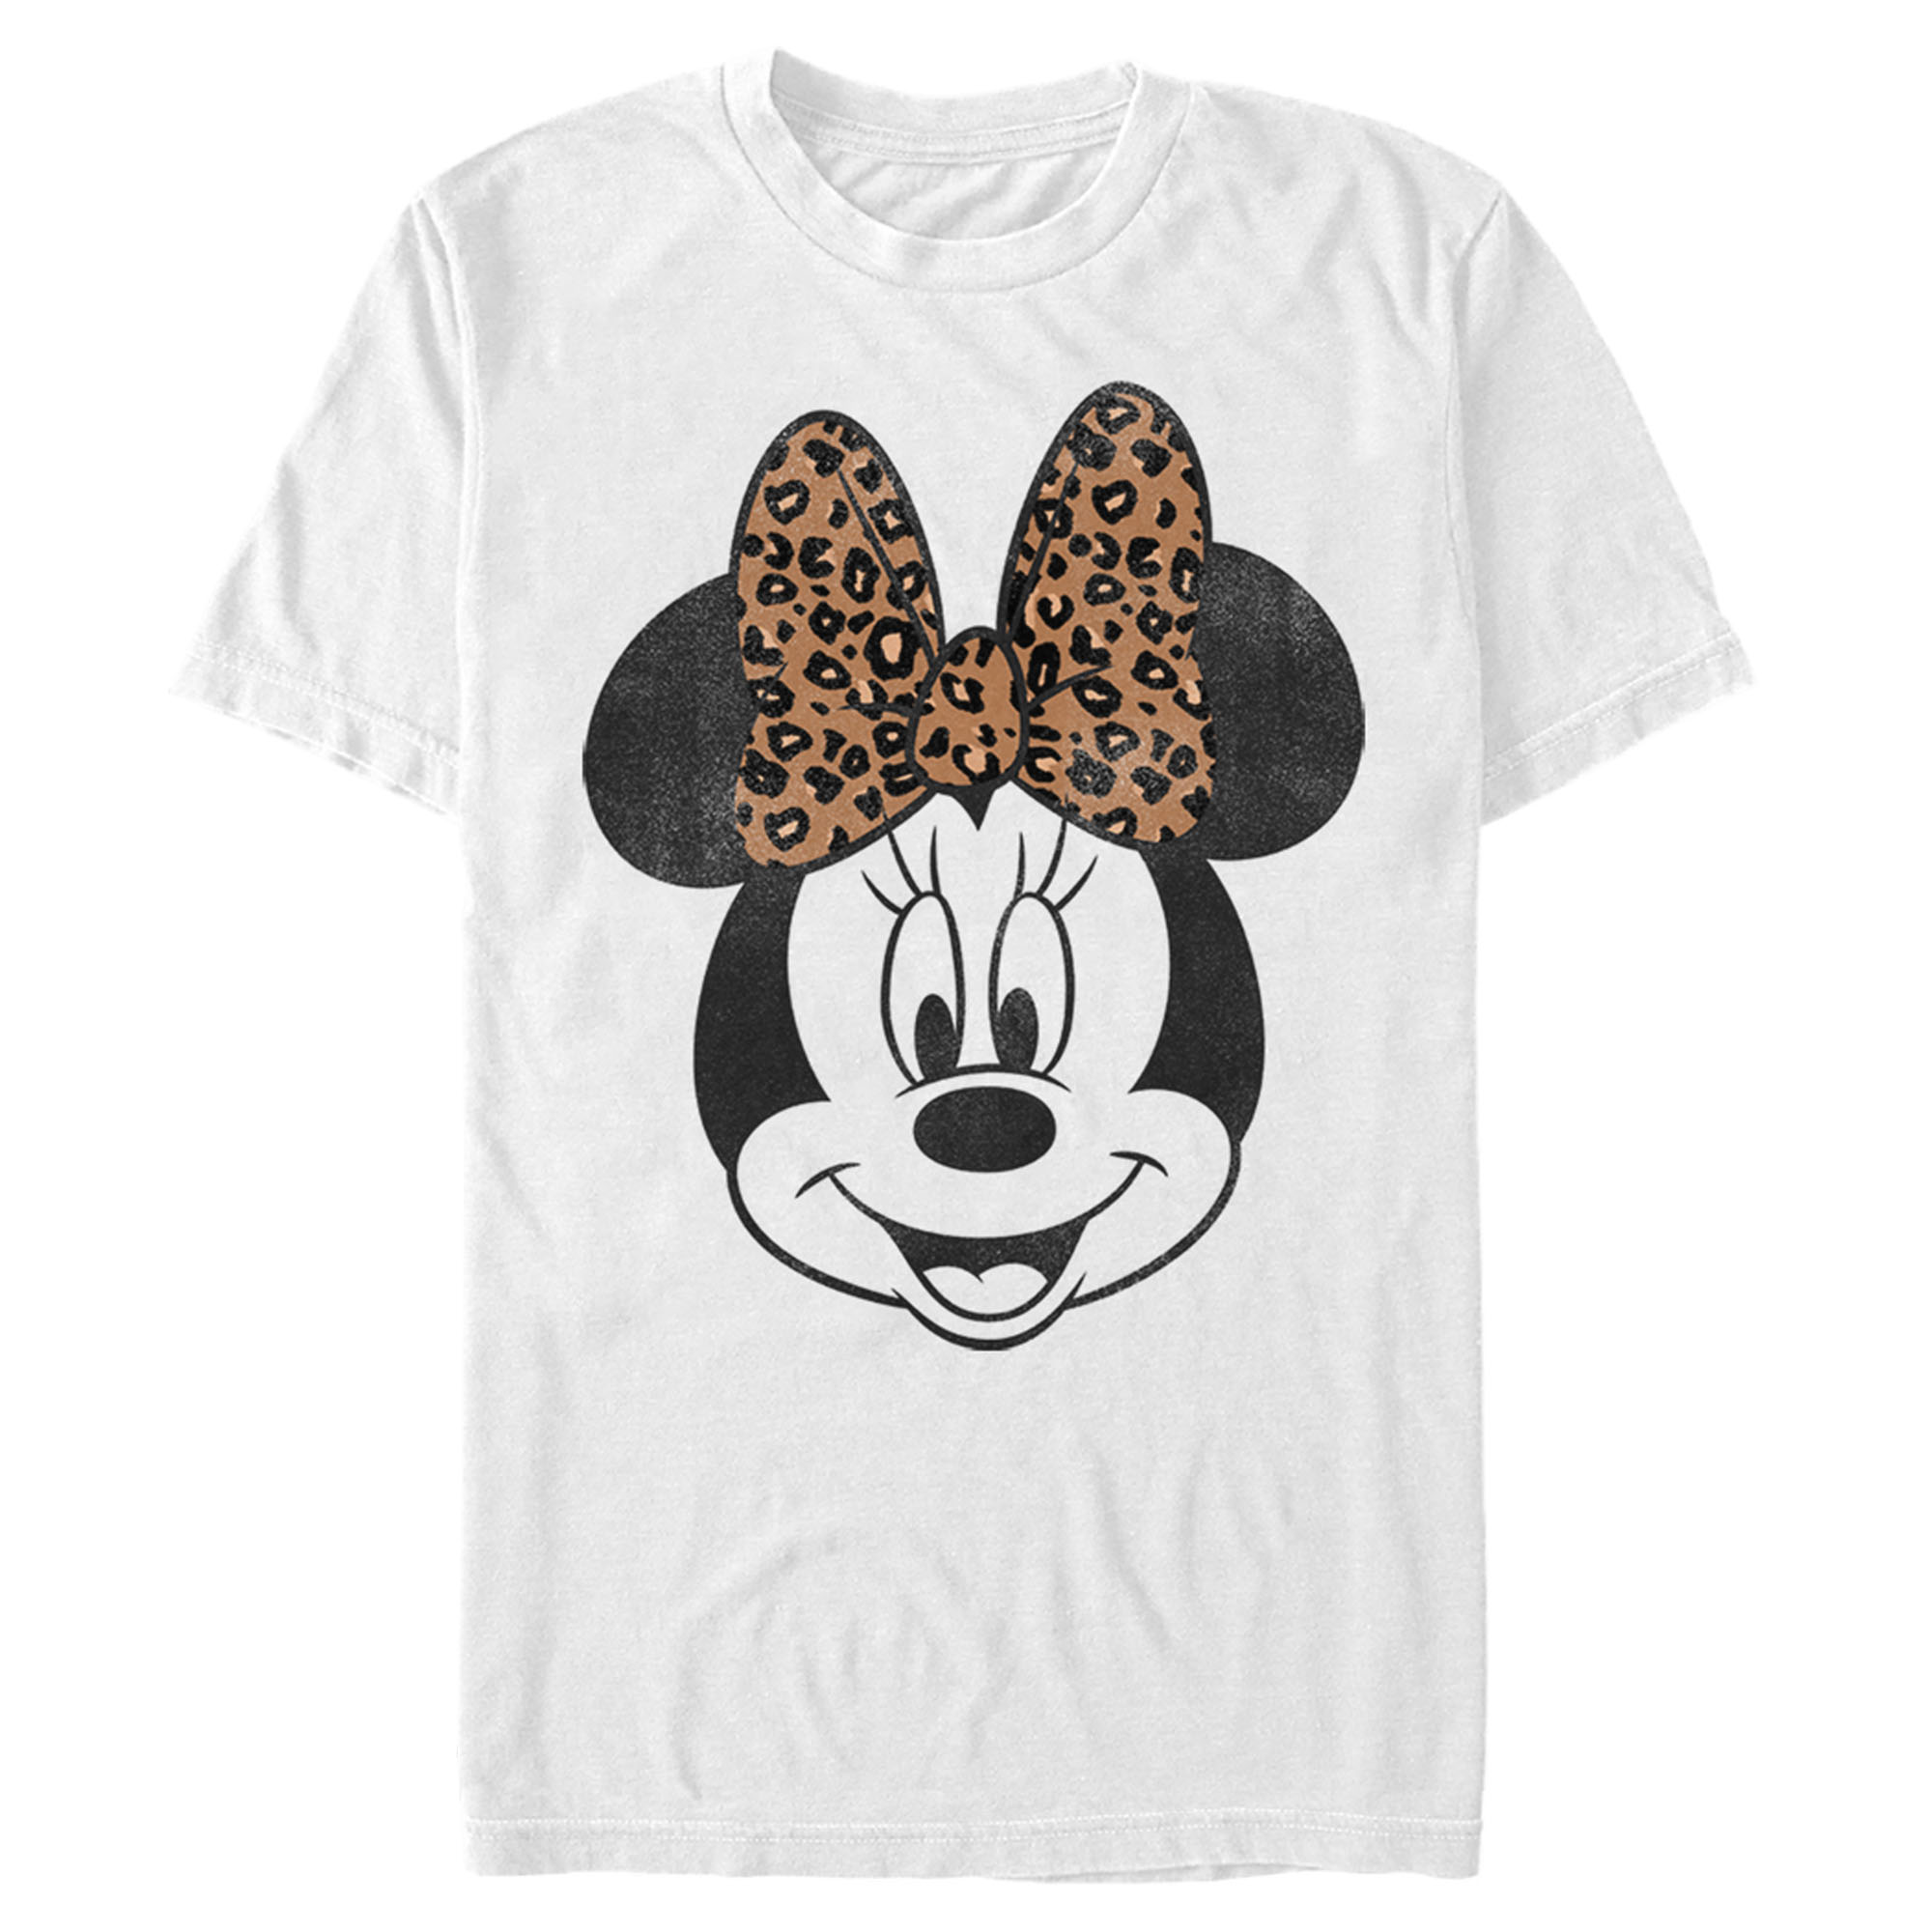 Men's Mickey & Friends Minnie Mouse Cheetah Print Bow  Graphic Tee White X Large - image 1 of 4